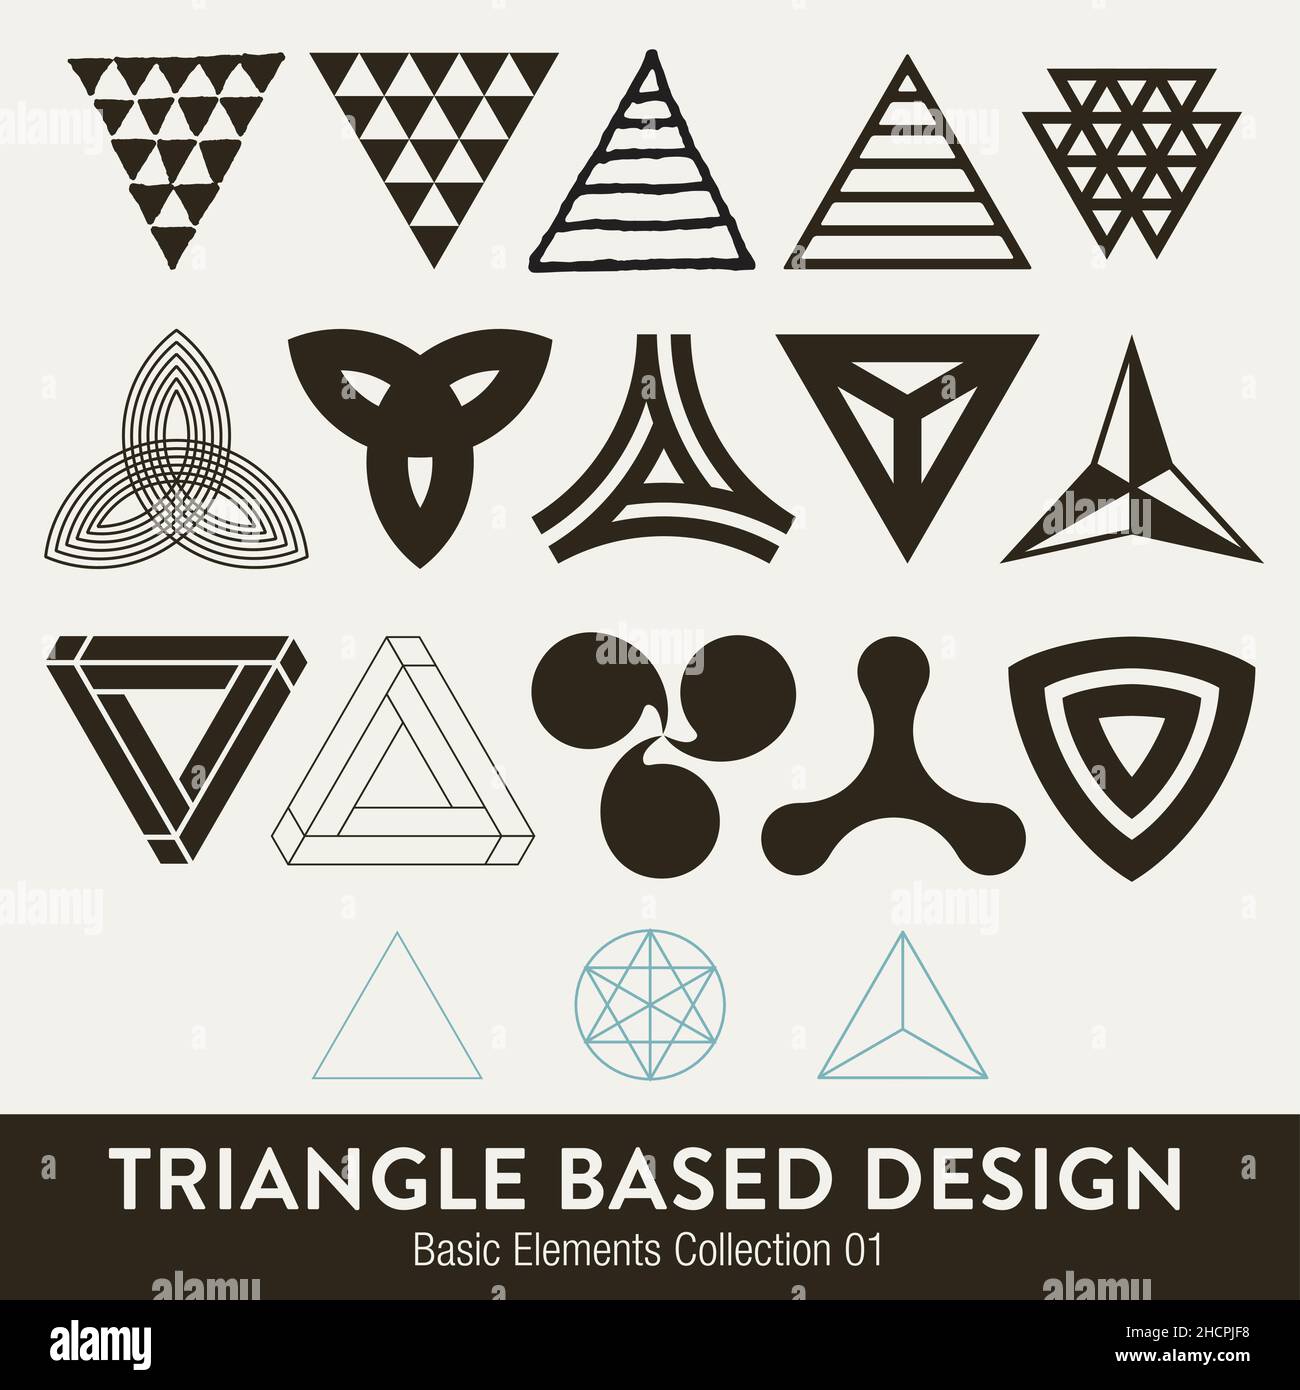 Vector basic element collection: Triangle based design Stock Vector